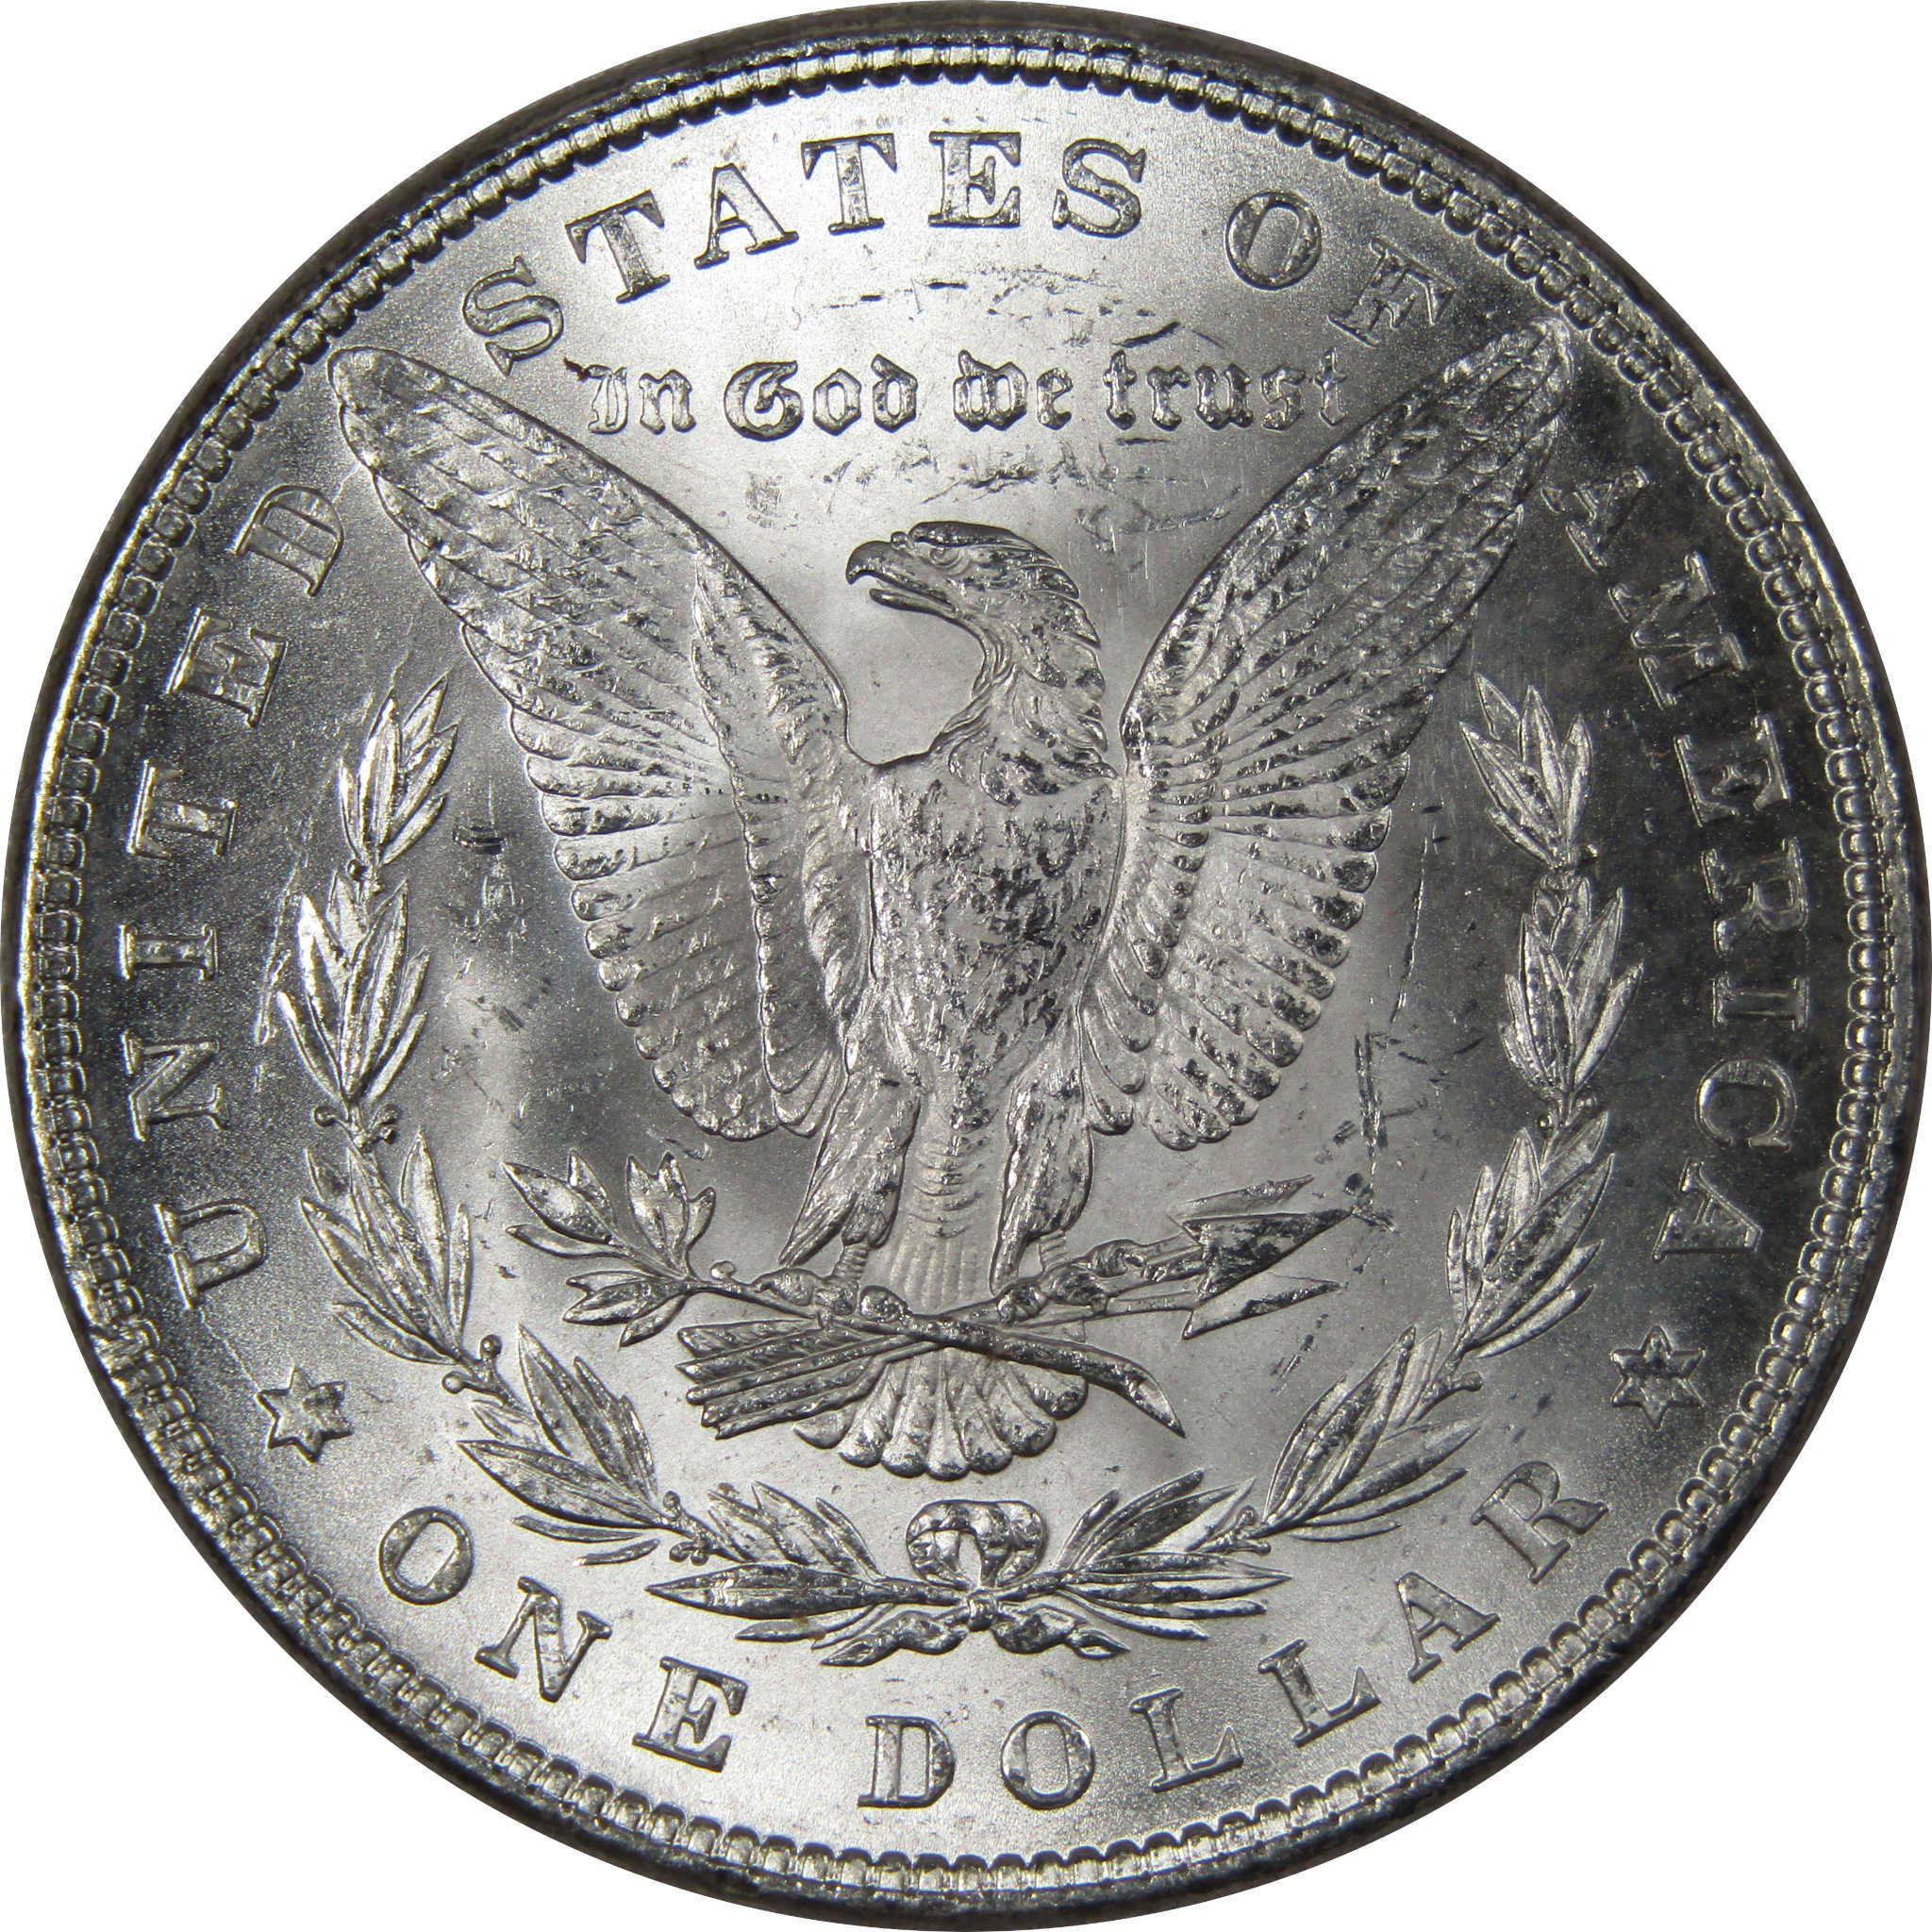 1882 Morgan Dollar BU Uncirculated Mint State 90% Silver SKU:IPC9648 - Morgan coin - Morgan silver dollar - Morgan silver dollar for sale - Profile Coins &amp; Collectibles